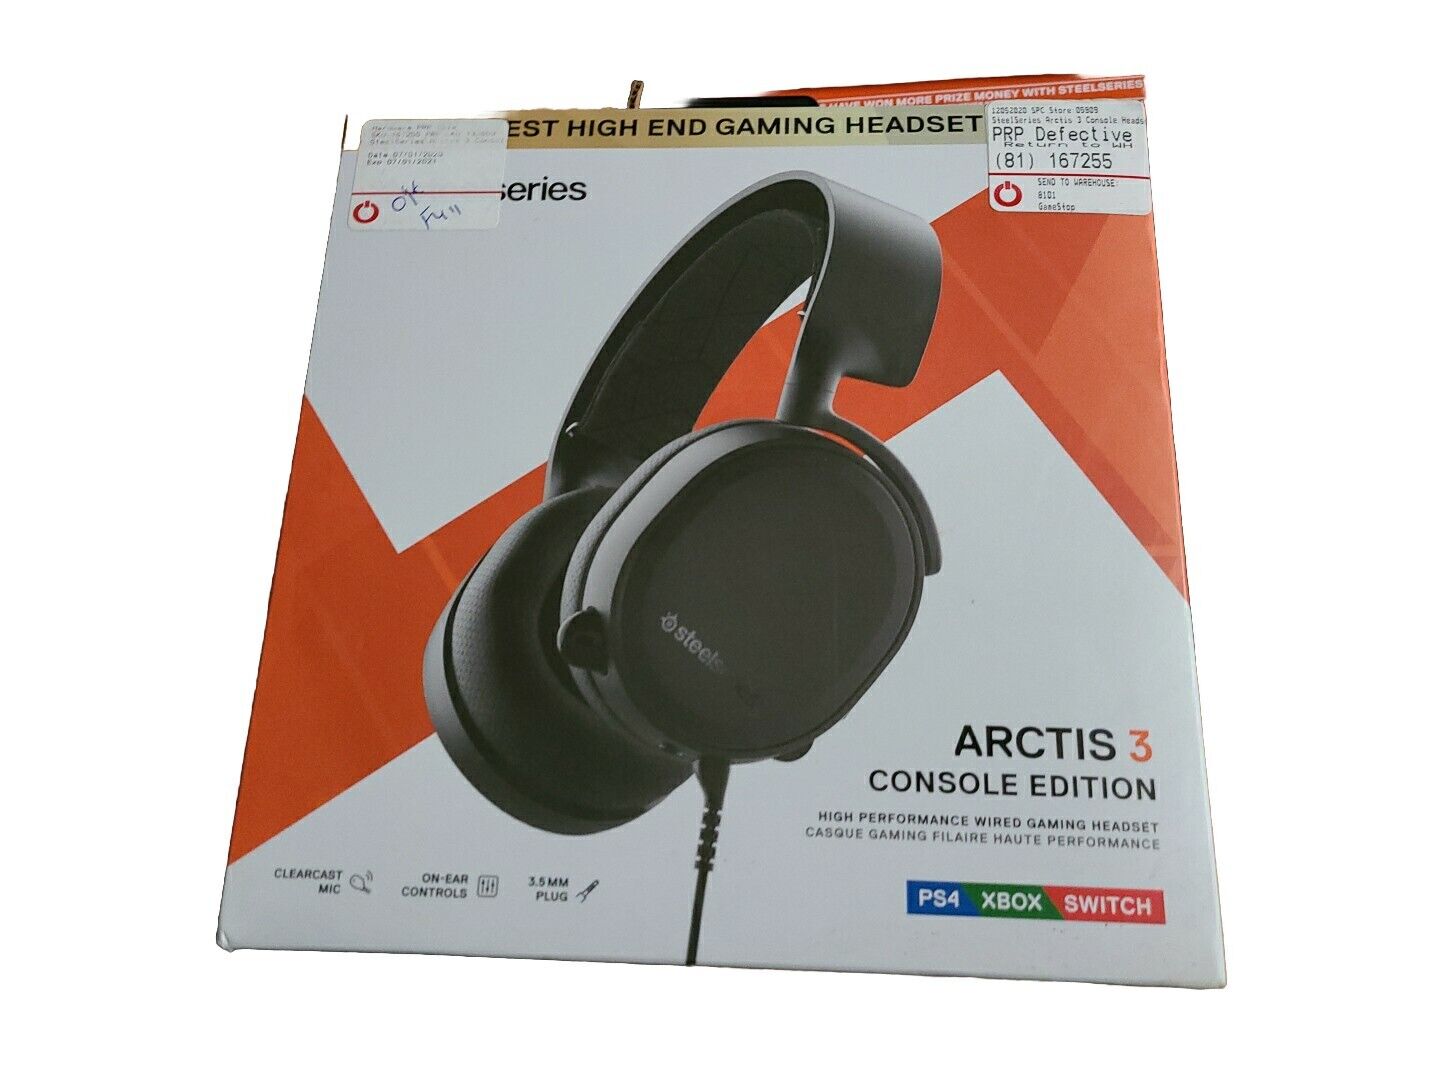 SteelSeries Arctis 3 Console - Stereo Wired Gaming Headset